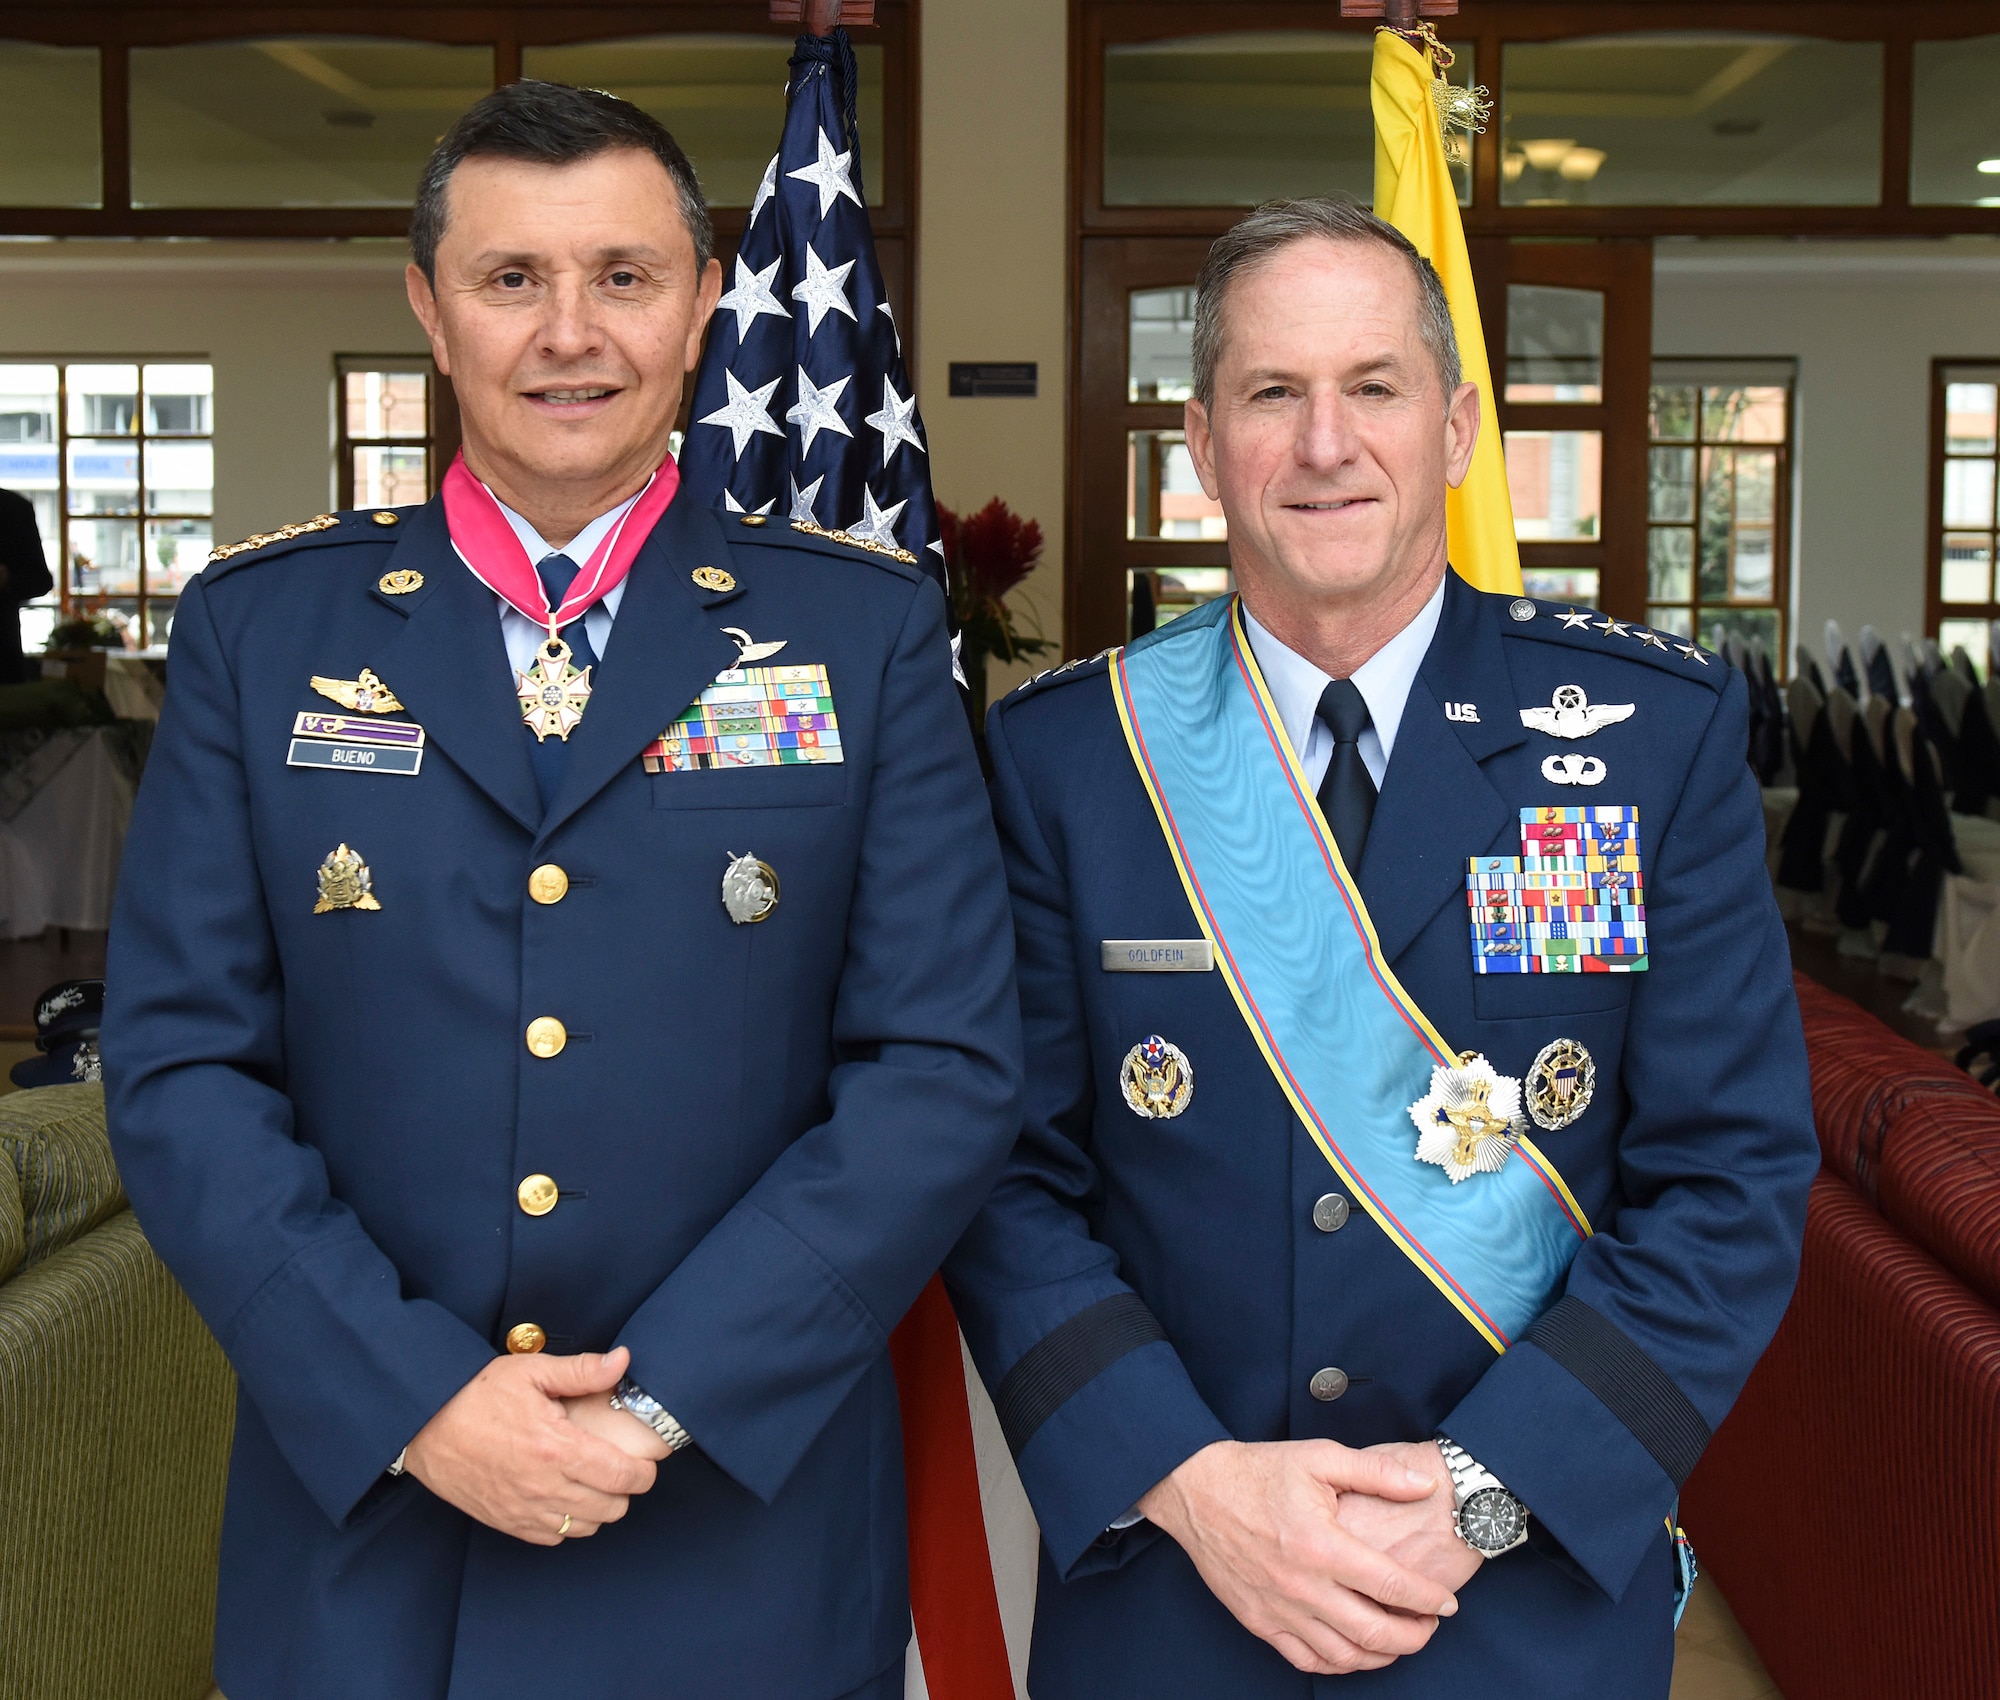 Air Force Chief of Staff Gen. David L. Goldfein and Commander of the Colombian Air Force General Carlos Eduardo Bueno Vargas pose for a photo in Bogota, Colombia, Nov. 15, 2018. In 1822, the United States became one of the first countries to recognize the republic of Colombia and to establish a resident diplomatic mission in the country. Goldfein's visit to the country and U.S. engagement in the region reflect the enduring promise of friendship, partnership and solidarity between the Americas. (U.S. Air Force photo by Tech Sgt. Anthony Nelson Jr.)